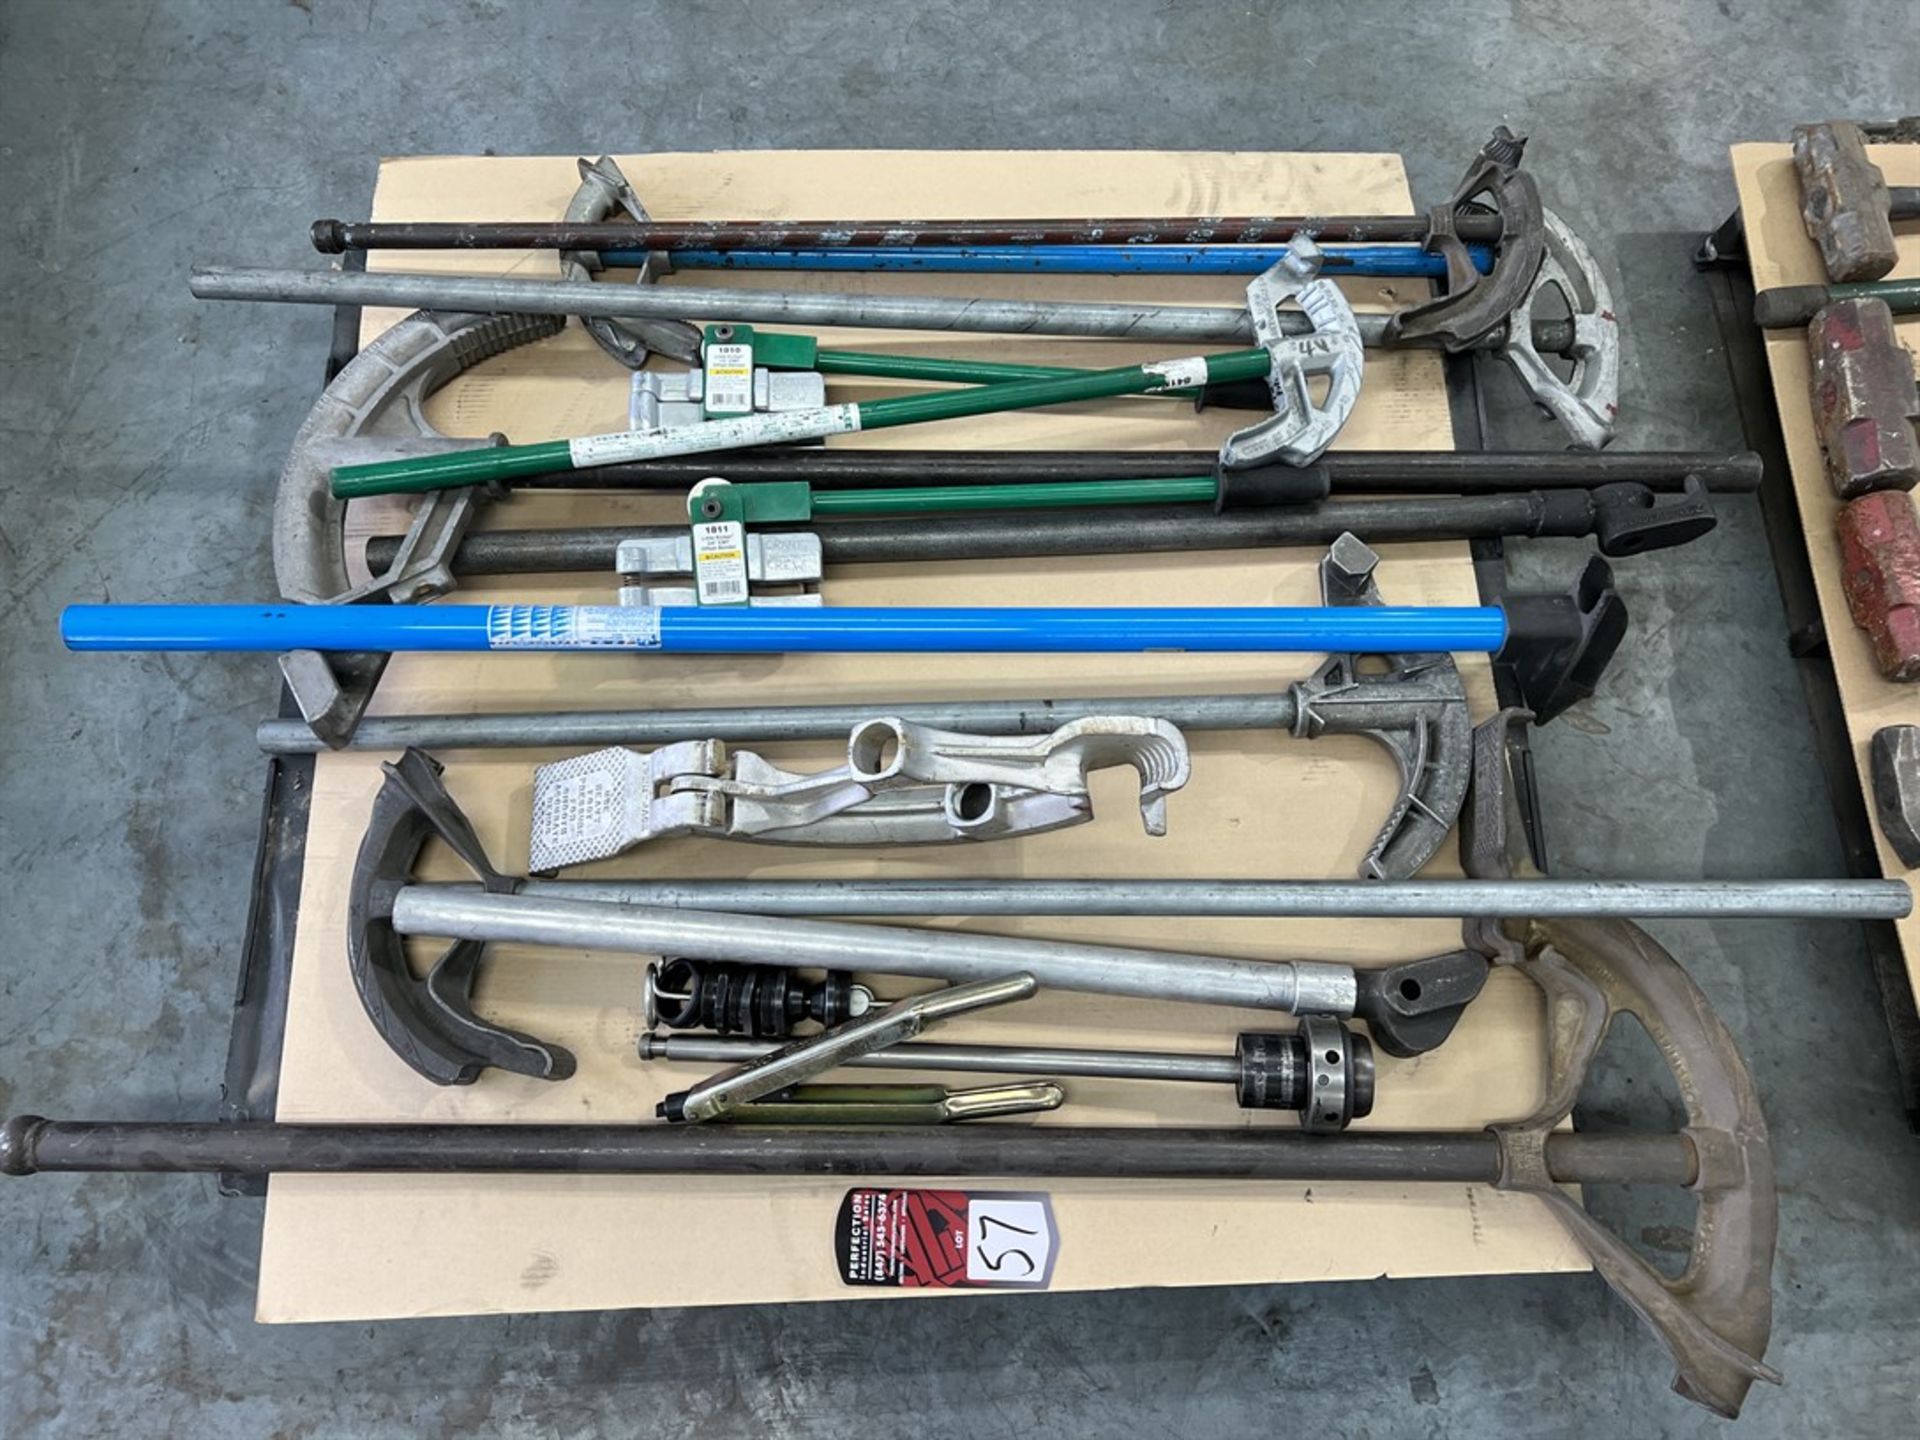 Pallet of Assorted Conduit and Pipe Benders (Building 44)